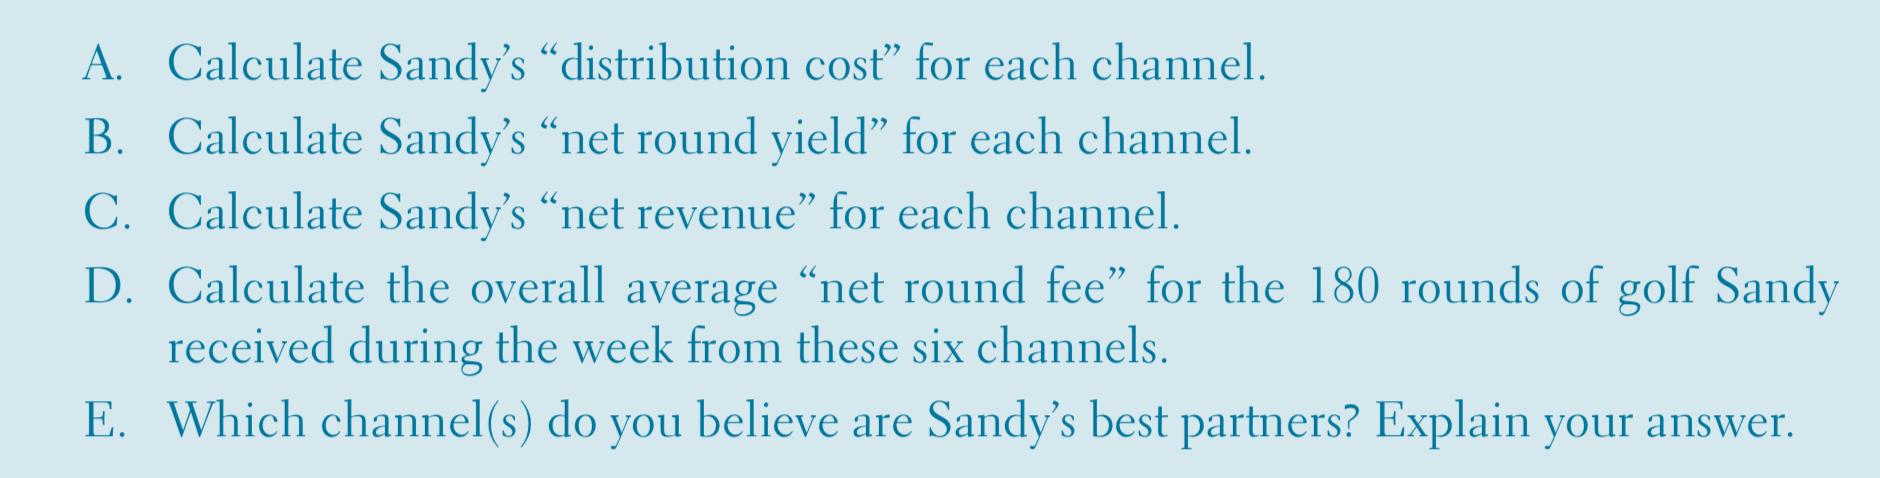 A. Calculate Sandys “distribution cost” for each channel. B. Calculate Sandys “net round yield” for each channel. C. Calcul